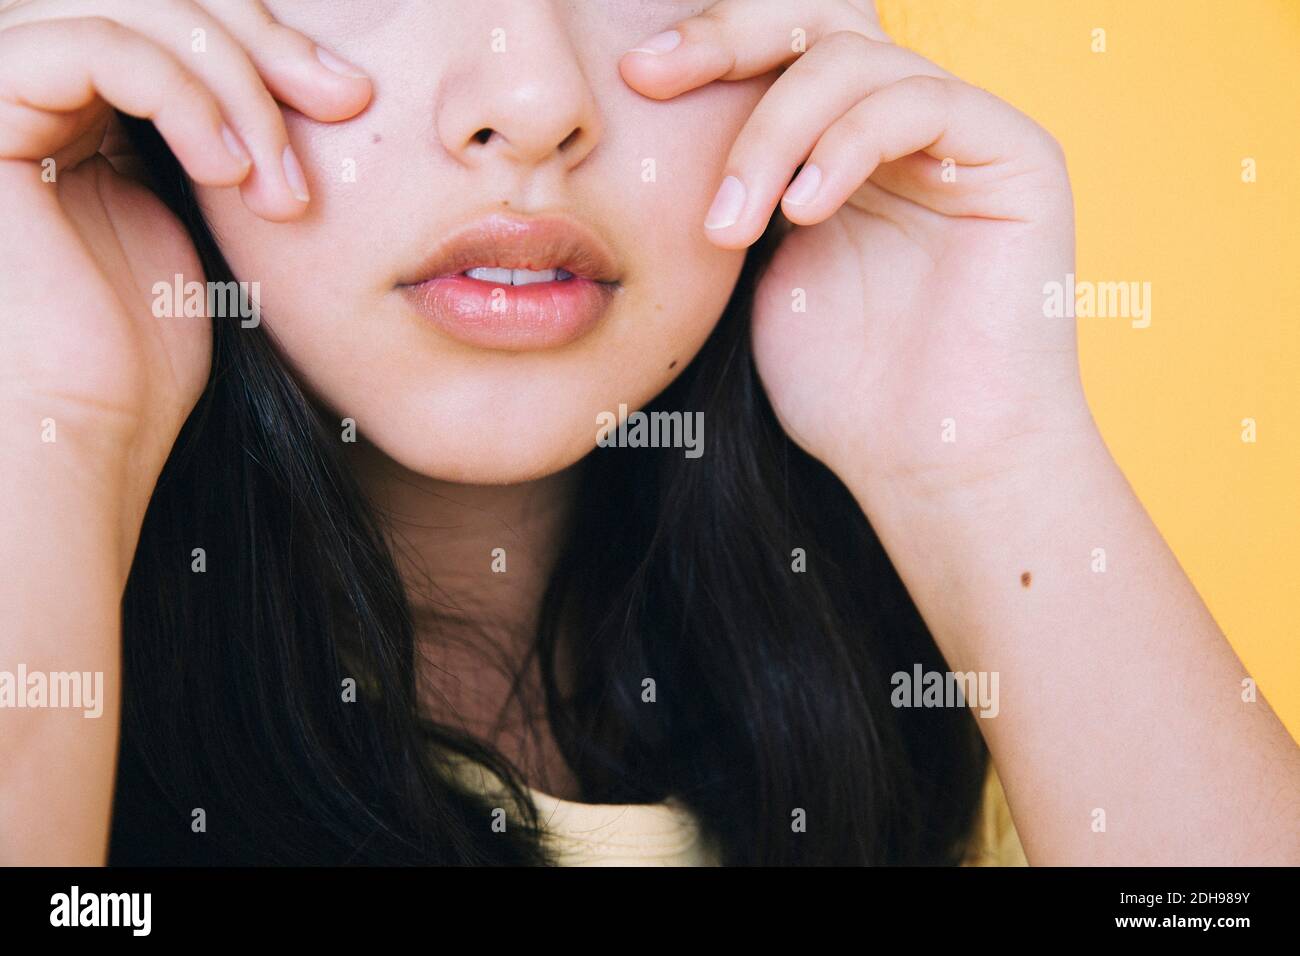 Midsection of girl against yellow background Stock Photo